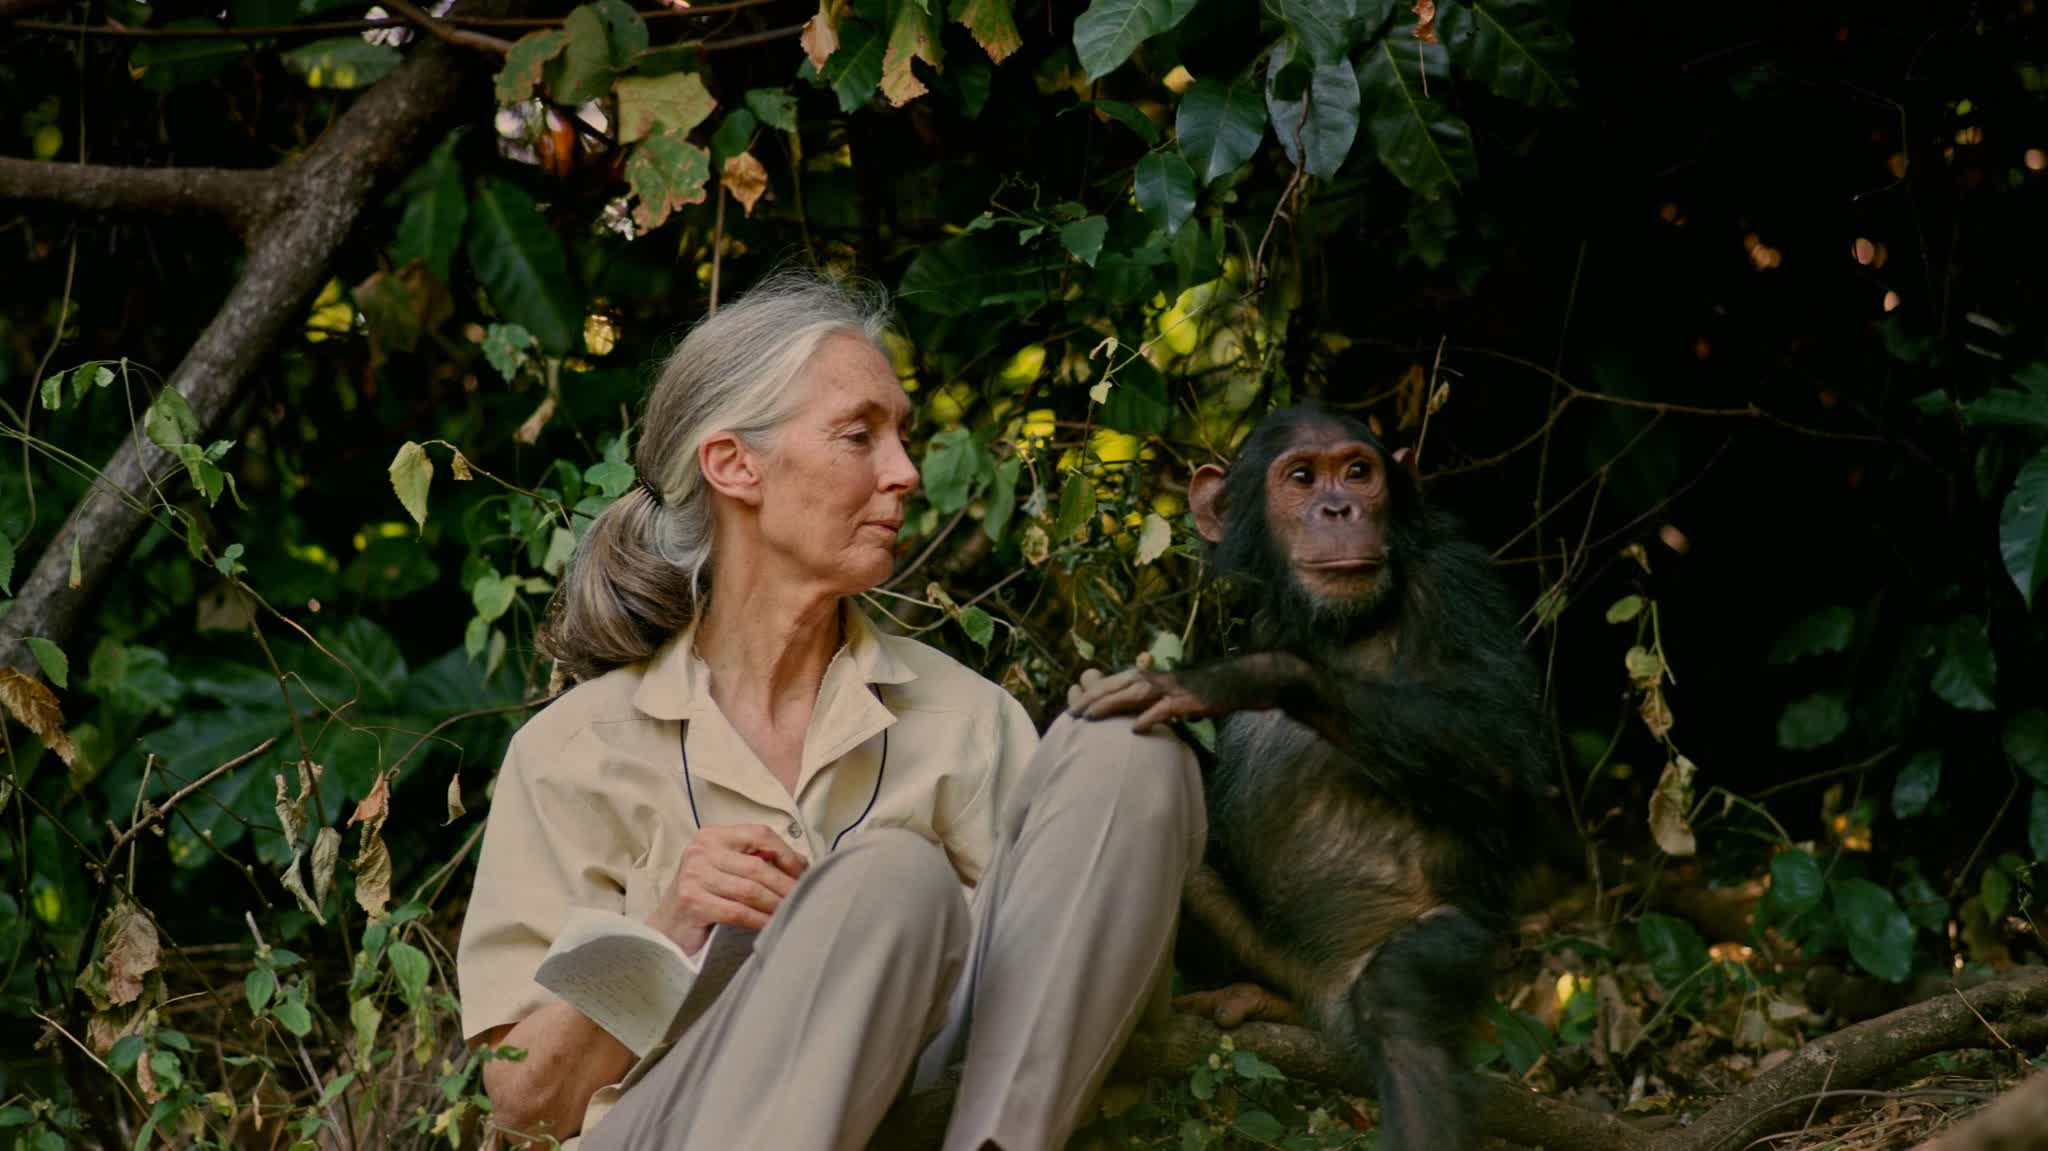 Hong Kong Space Museum to launch new dome show 'Jane Goodall - Reasons for Hope'